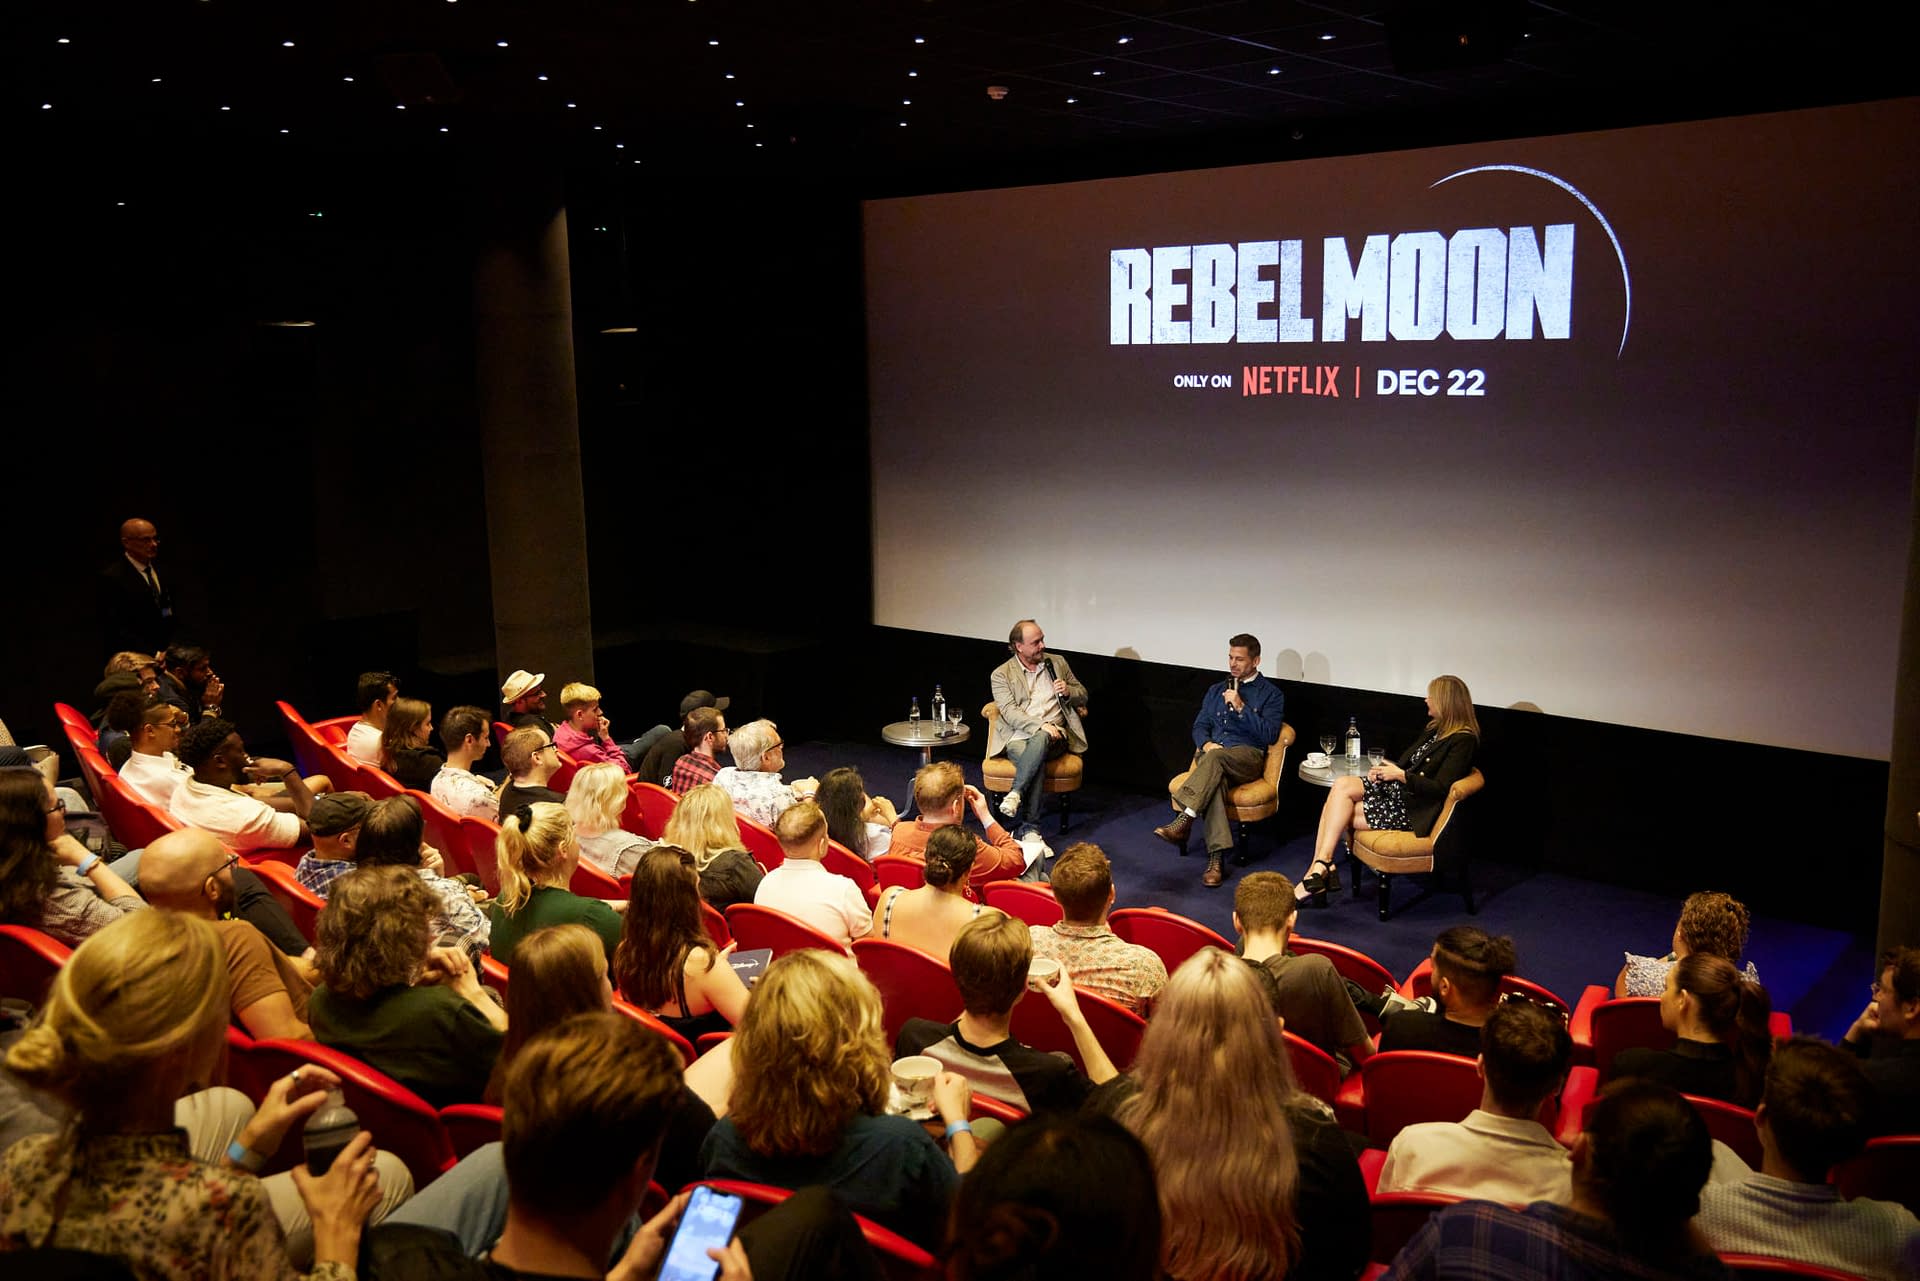 Rebel Moon - Part One: A Child of Fire' trailer out now: Watch here - ABC  News